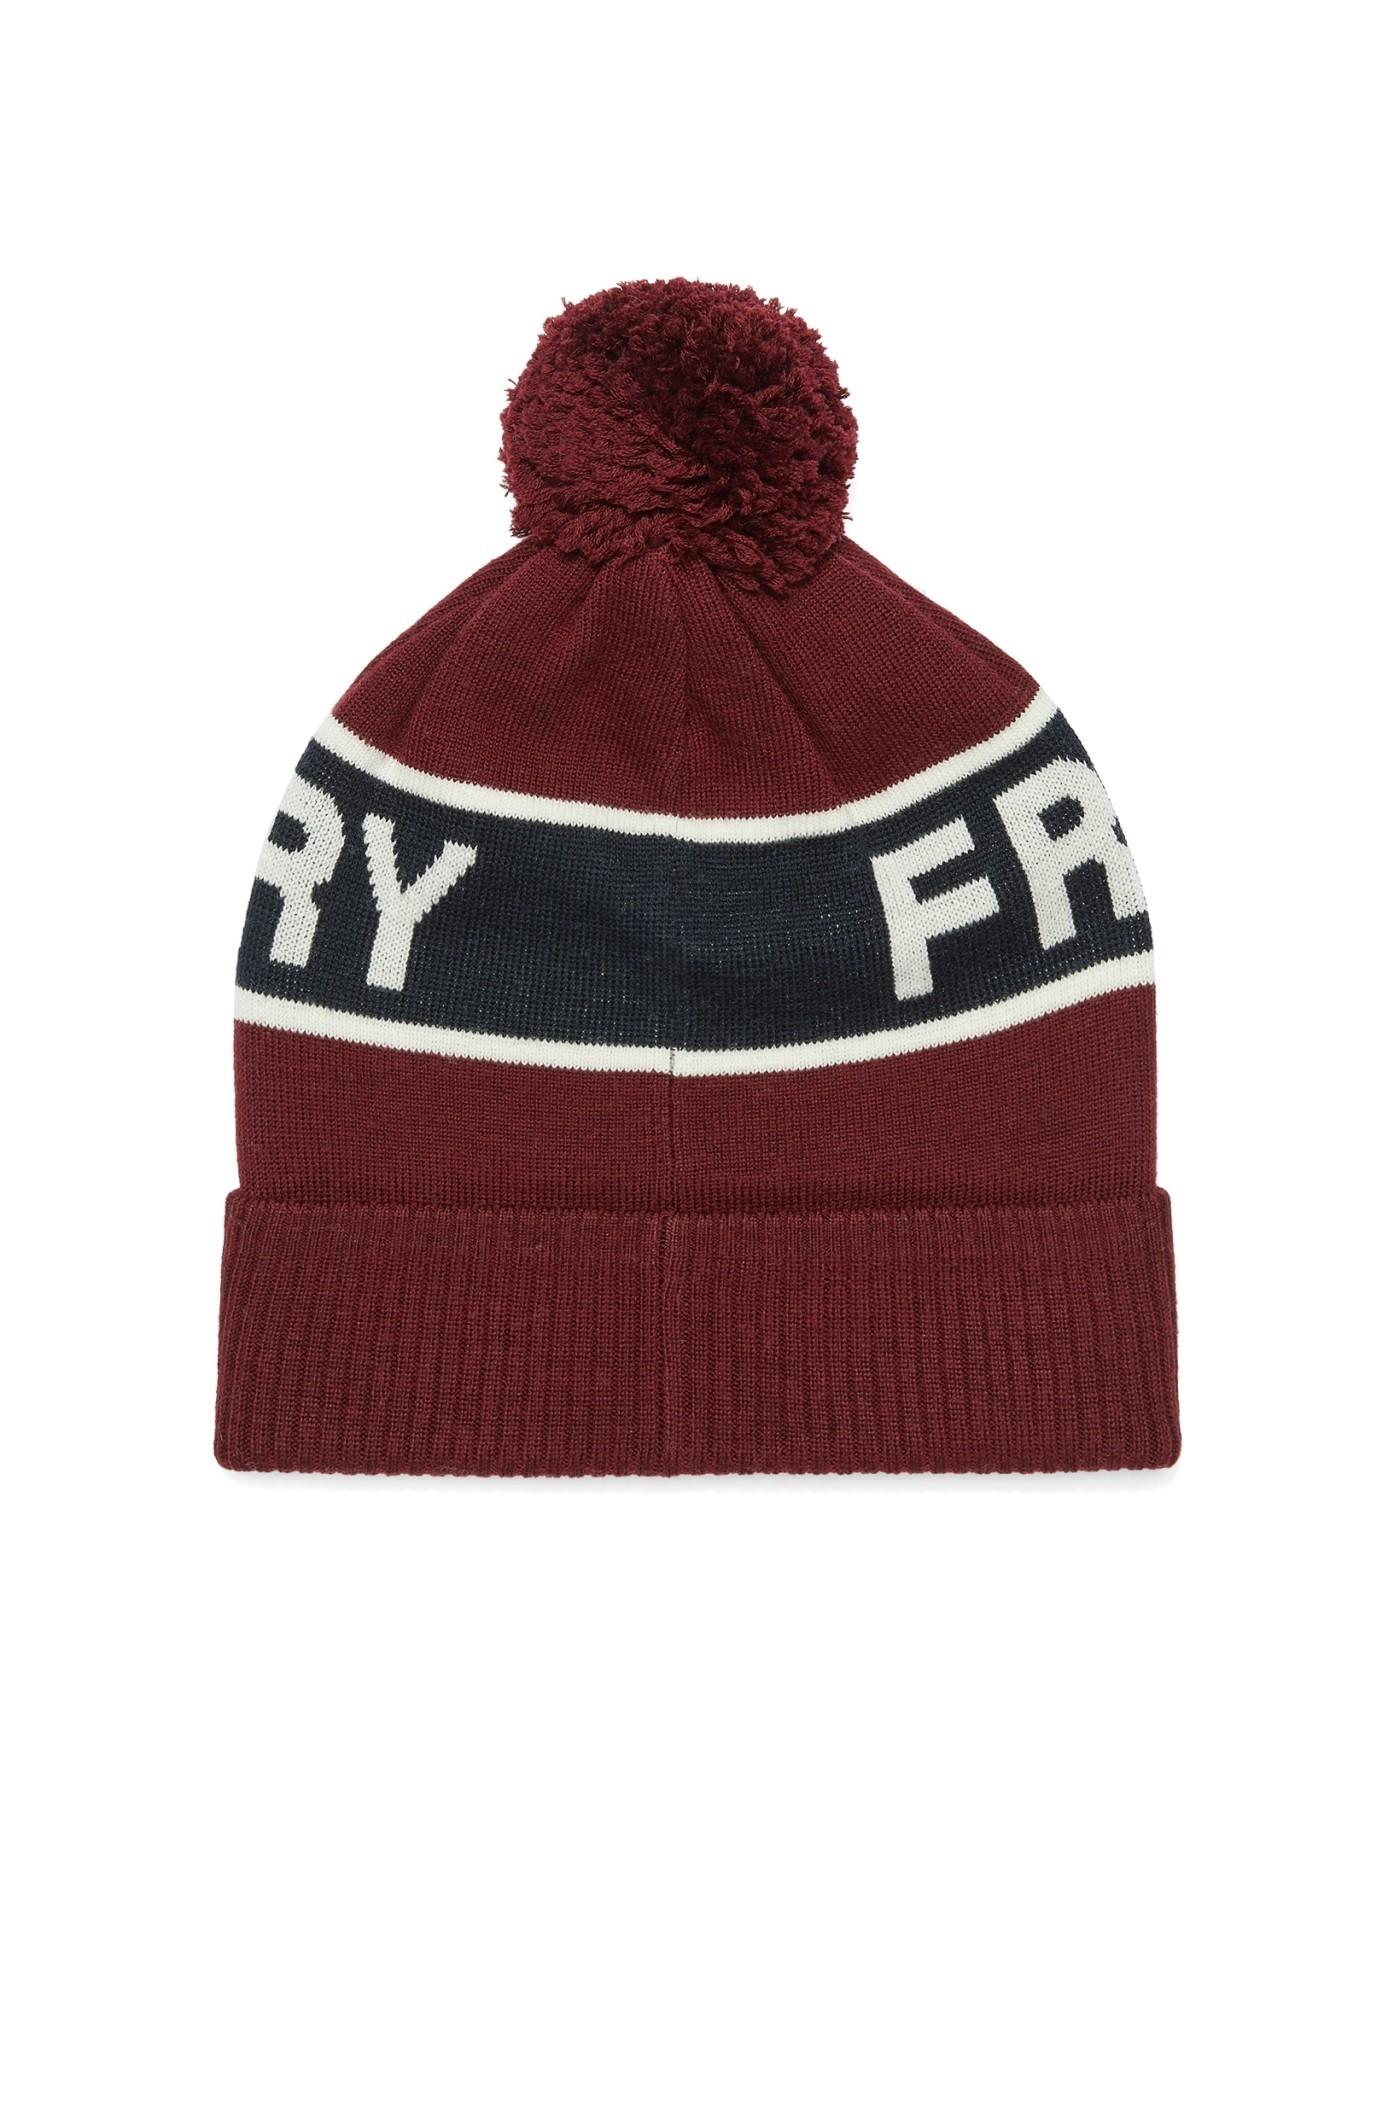 Fred Perry Wool C2105 F05 Ski Beanie in Red for Men - Lyst